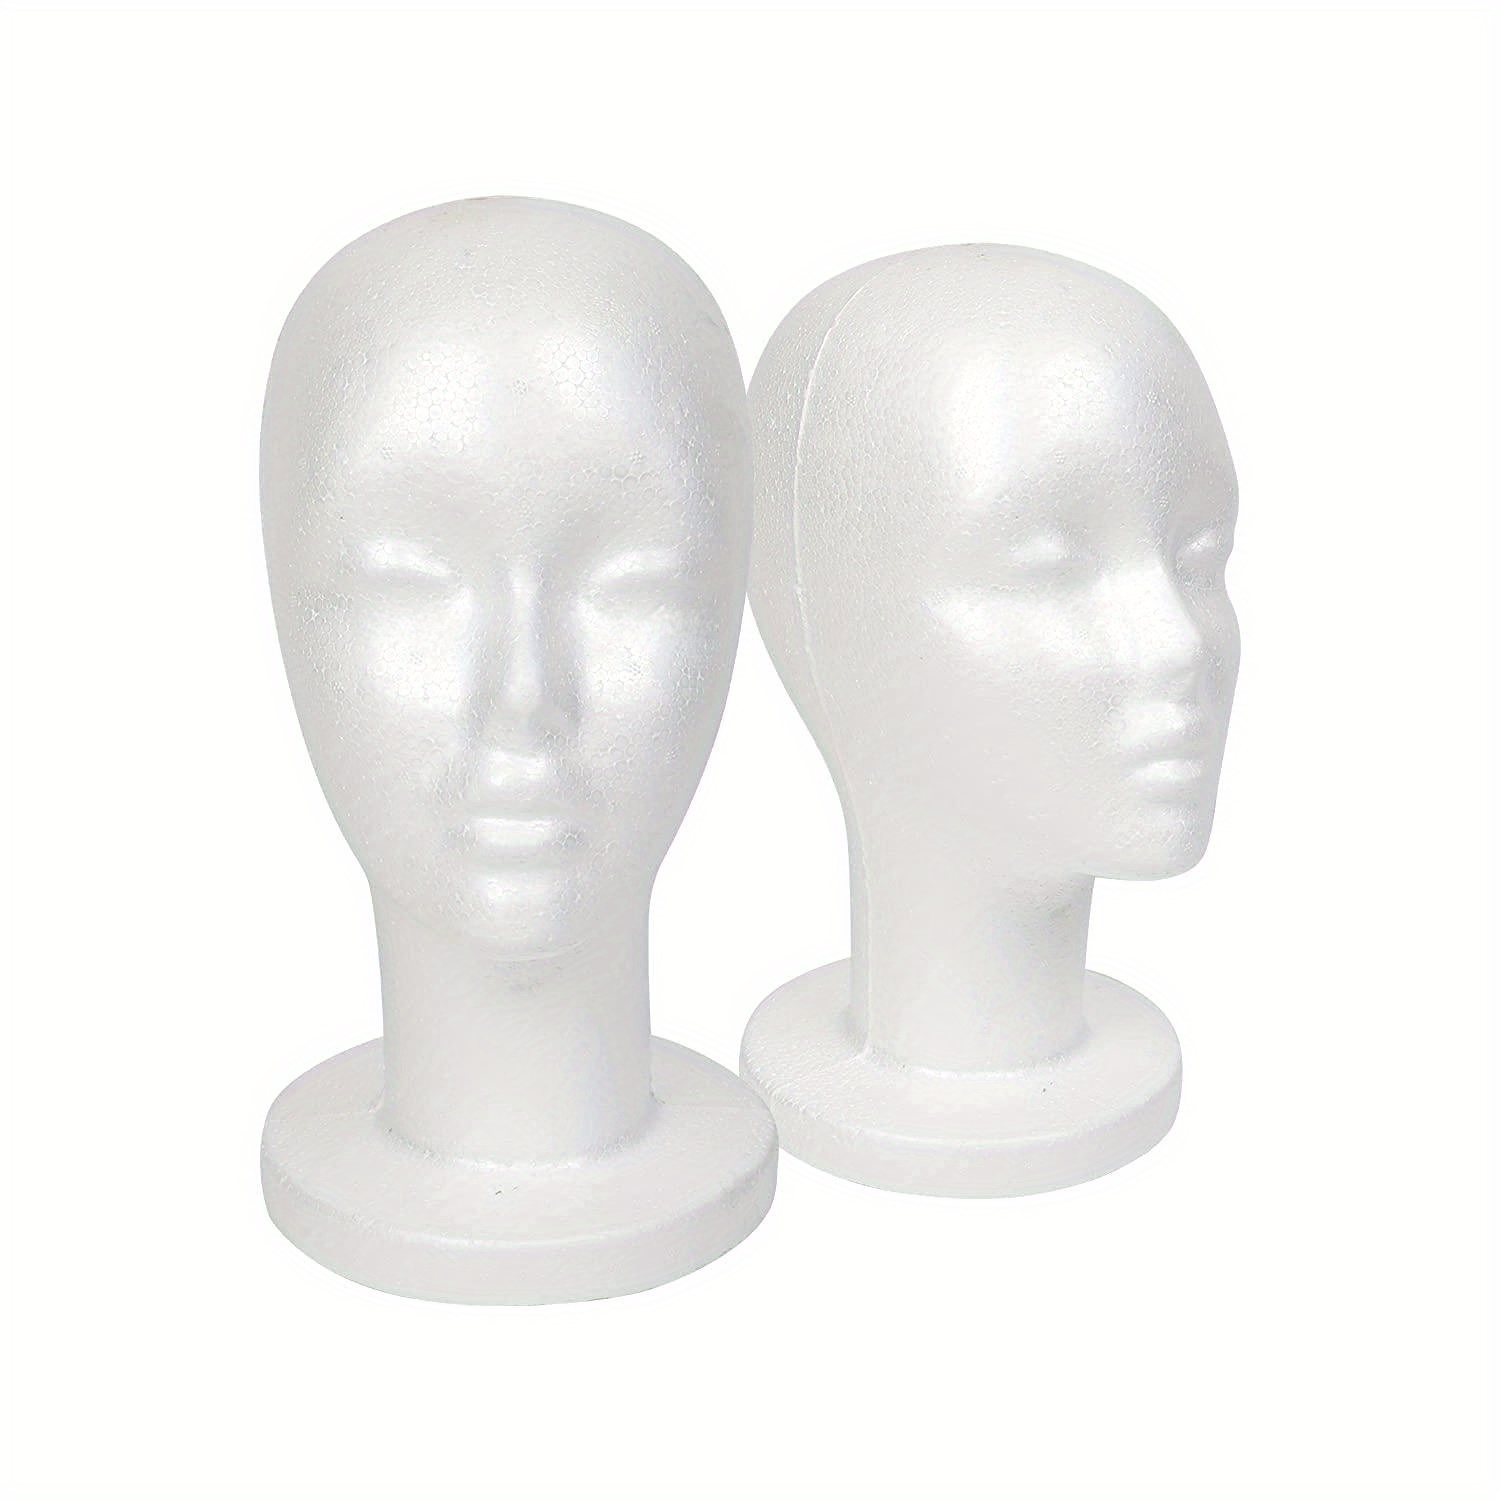 3 Pcs Styrofoam Wig Head 11 - Tall Female Foam Mannequin Wig Stand and  Holder for Style, Model for Display Hair, Hairpieces and Hats, Mask - for